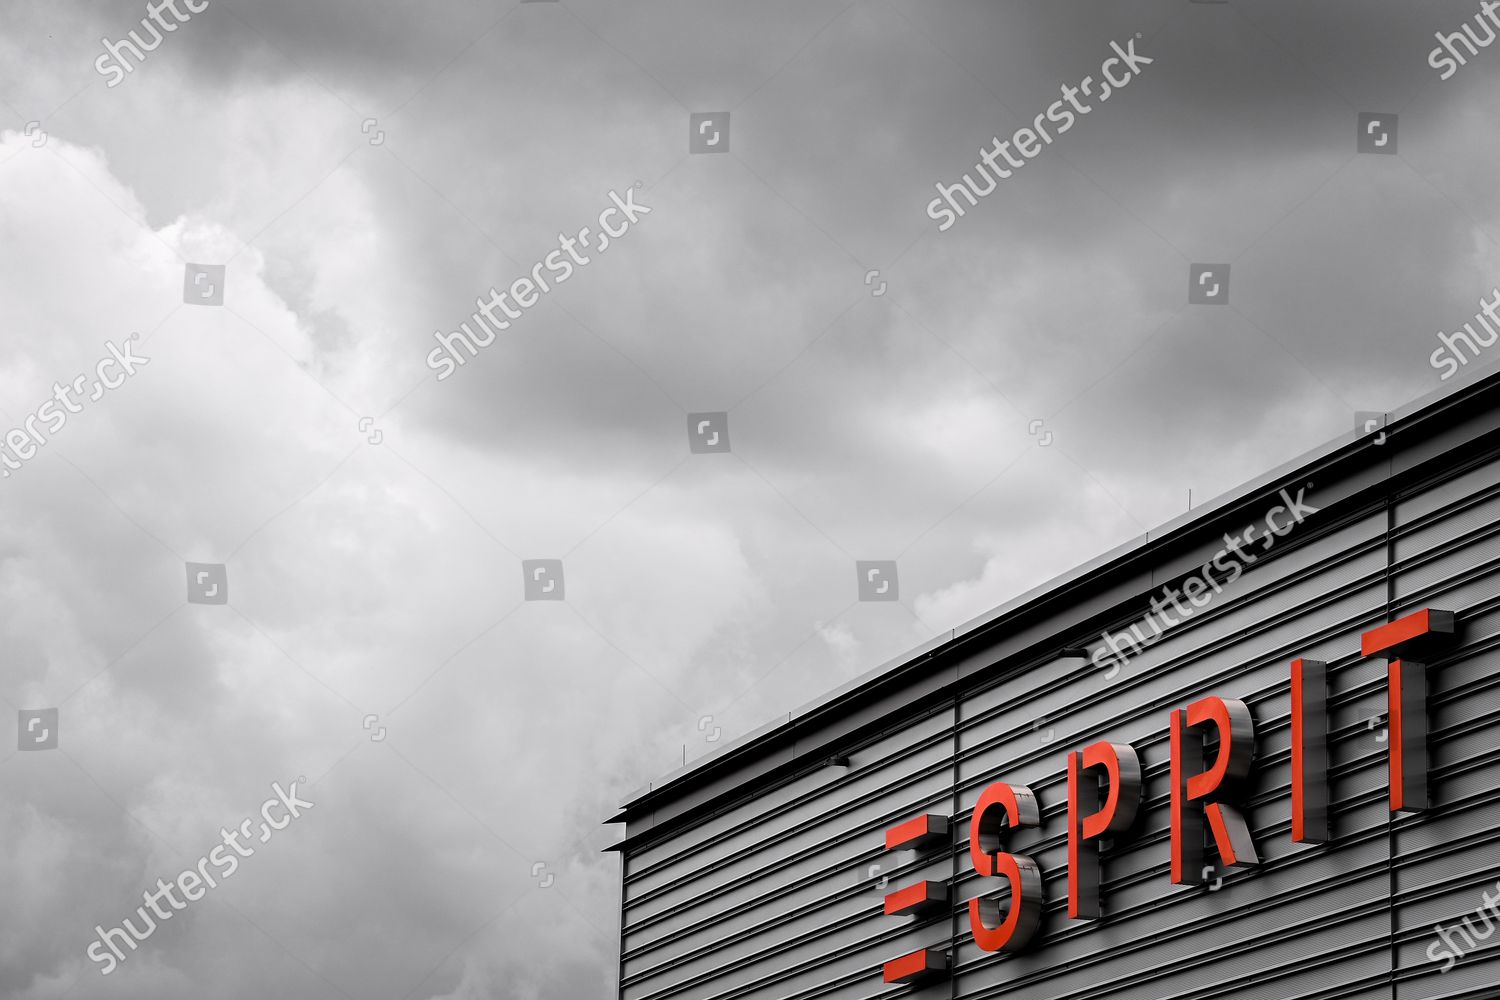 Logo Esprit Fashion Chain Companys Outlet Store Editorial Stock Photo Stock Image Shutterstock